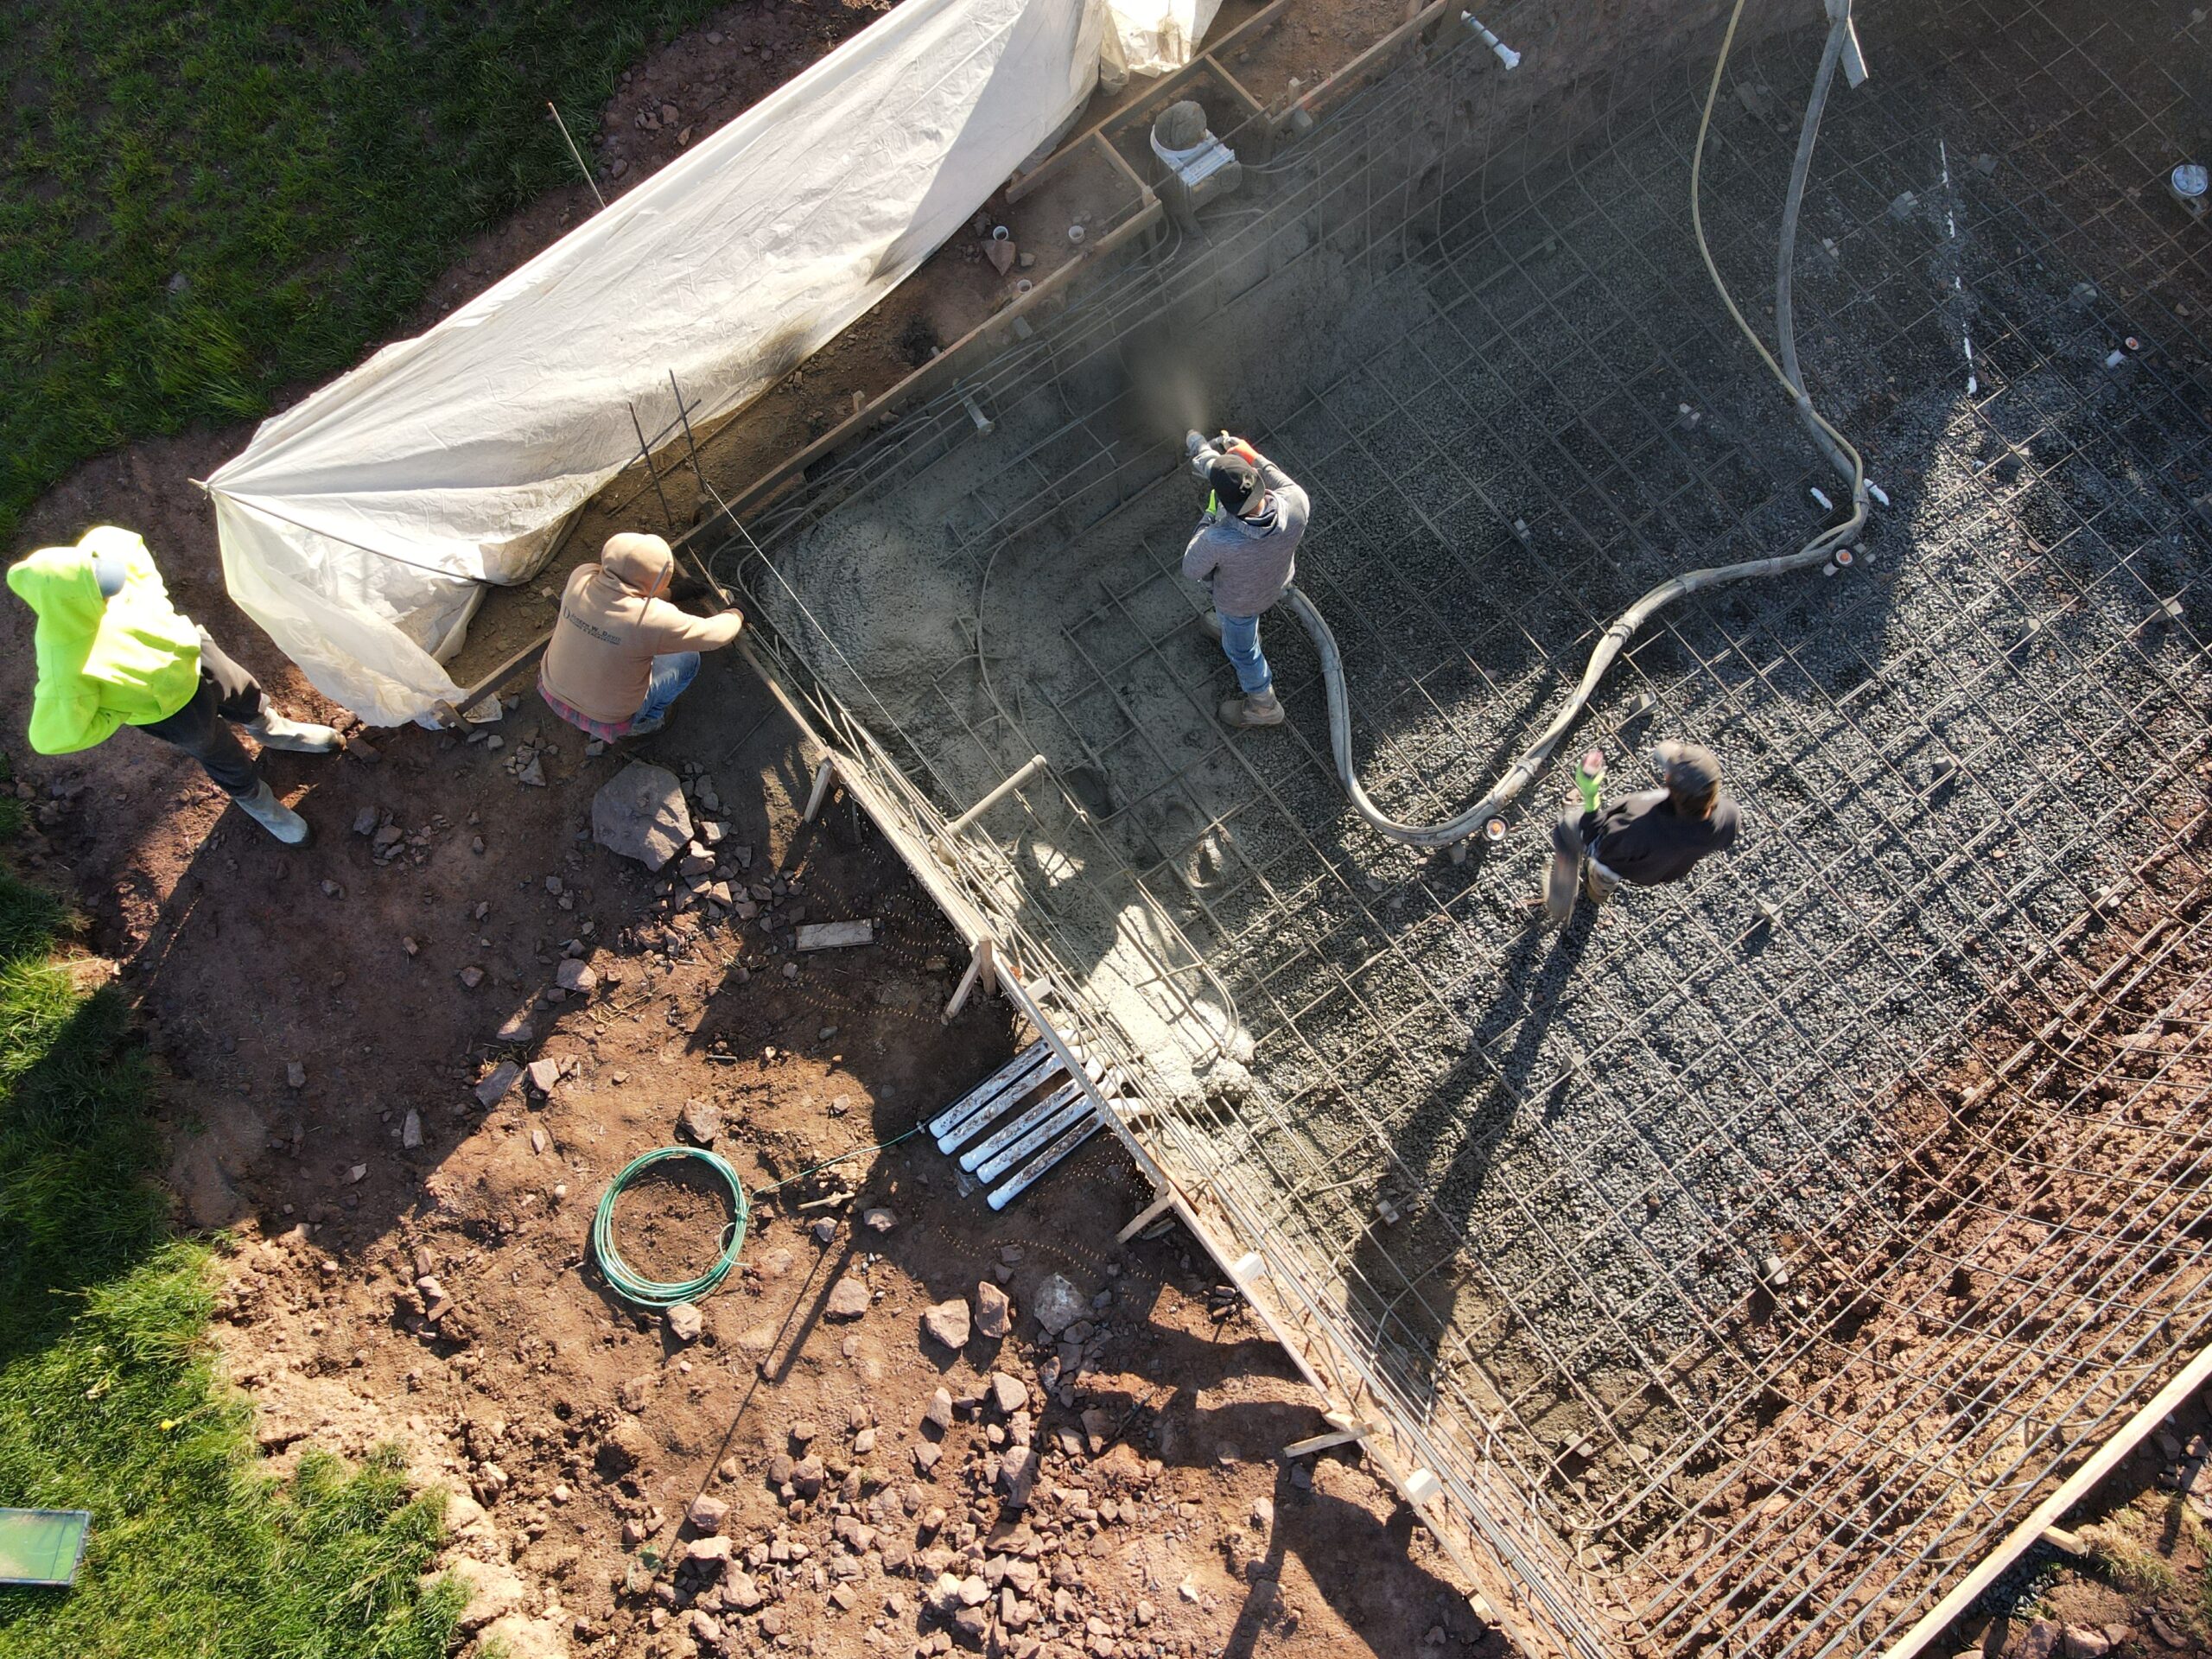 The start of an in-ground pool construction project with workers on site.